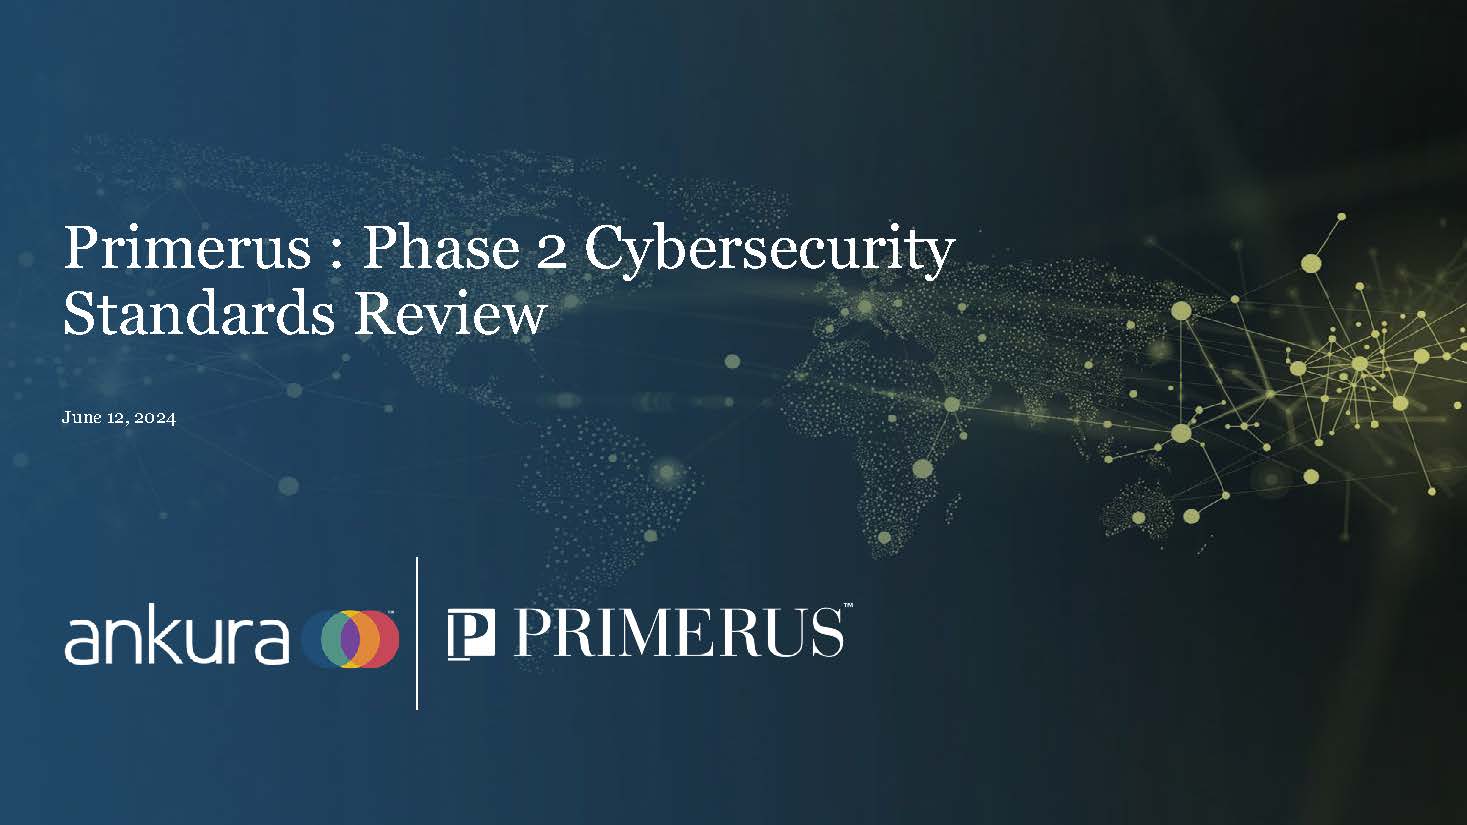 Primerus - Phase 2 Cybersecurity Standards Overview - June 2024 Webinar